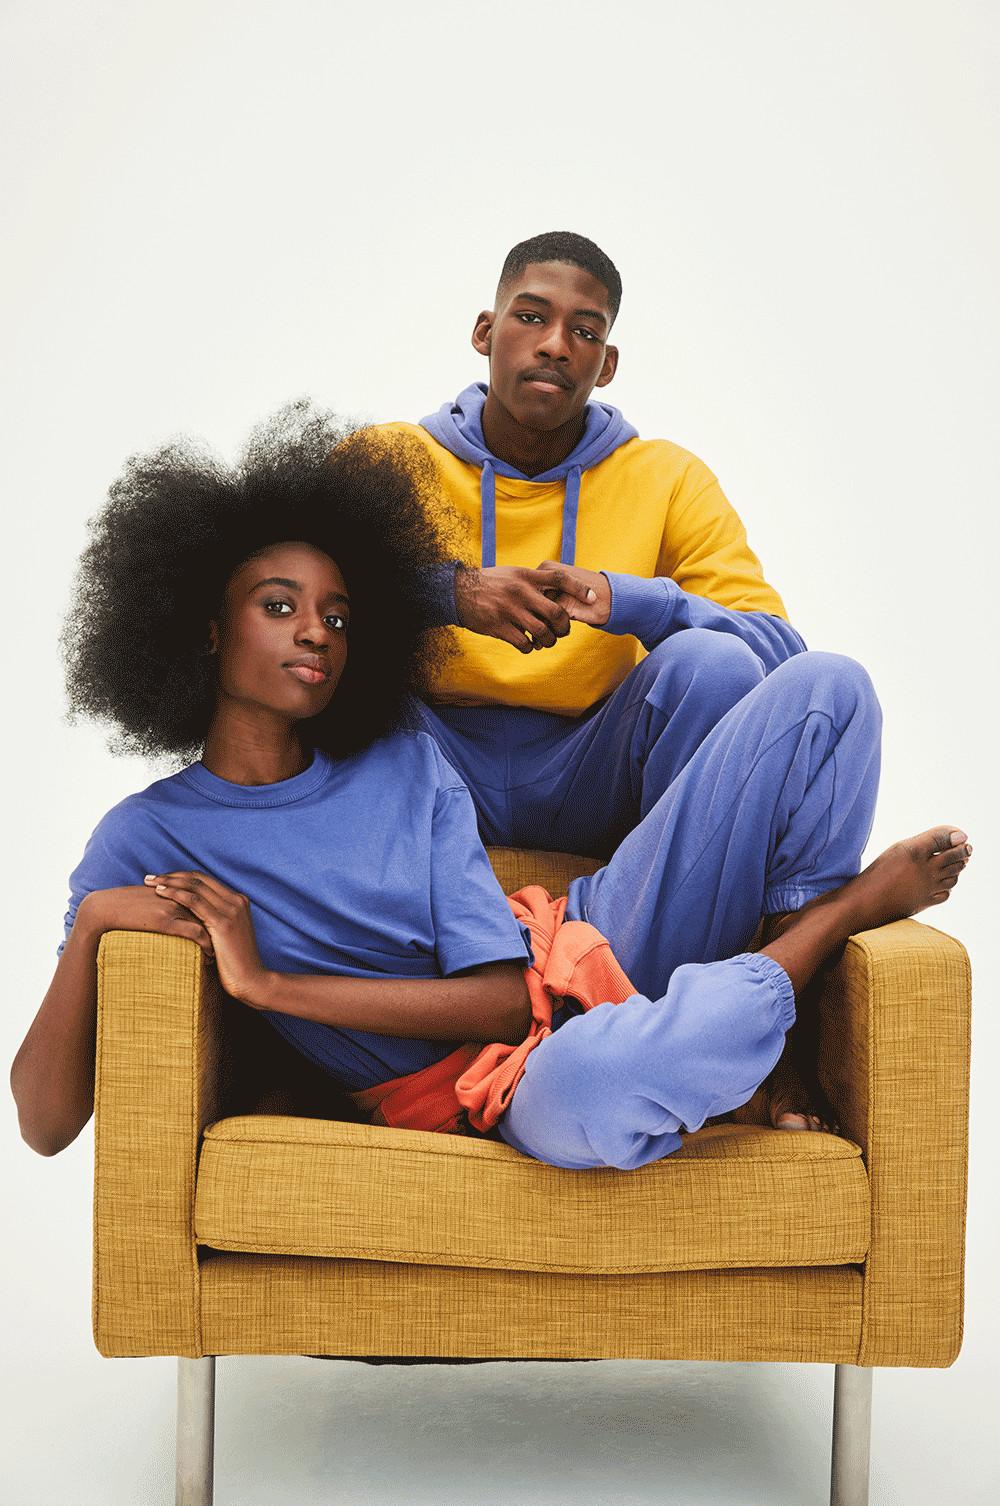 Models sit in mustard chair, woman wears purple set and man in yellow